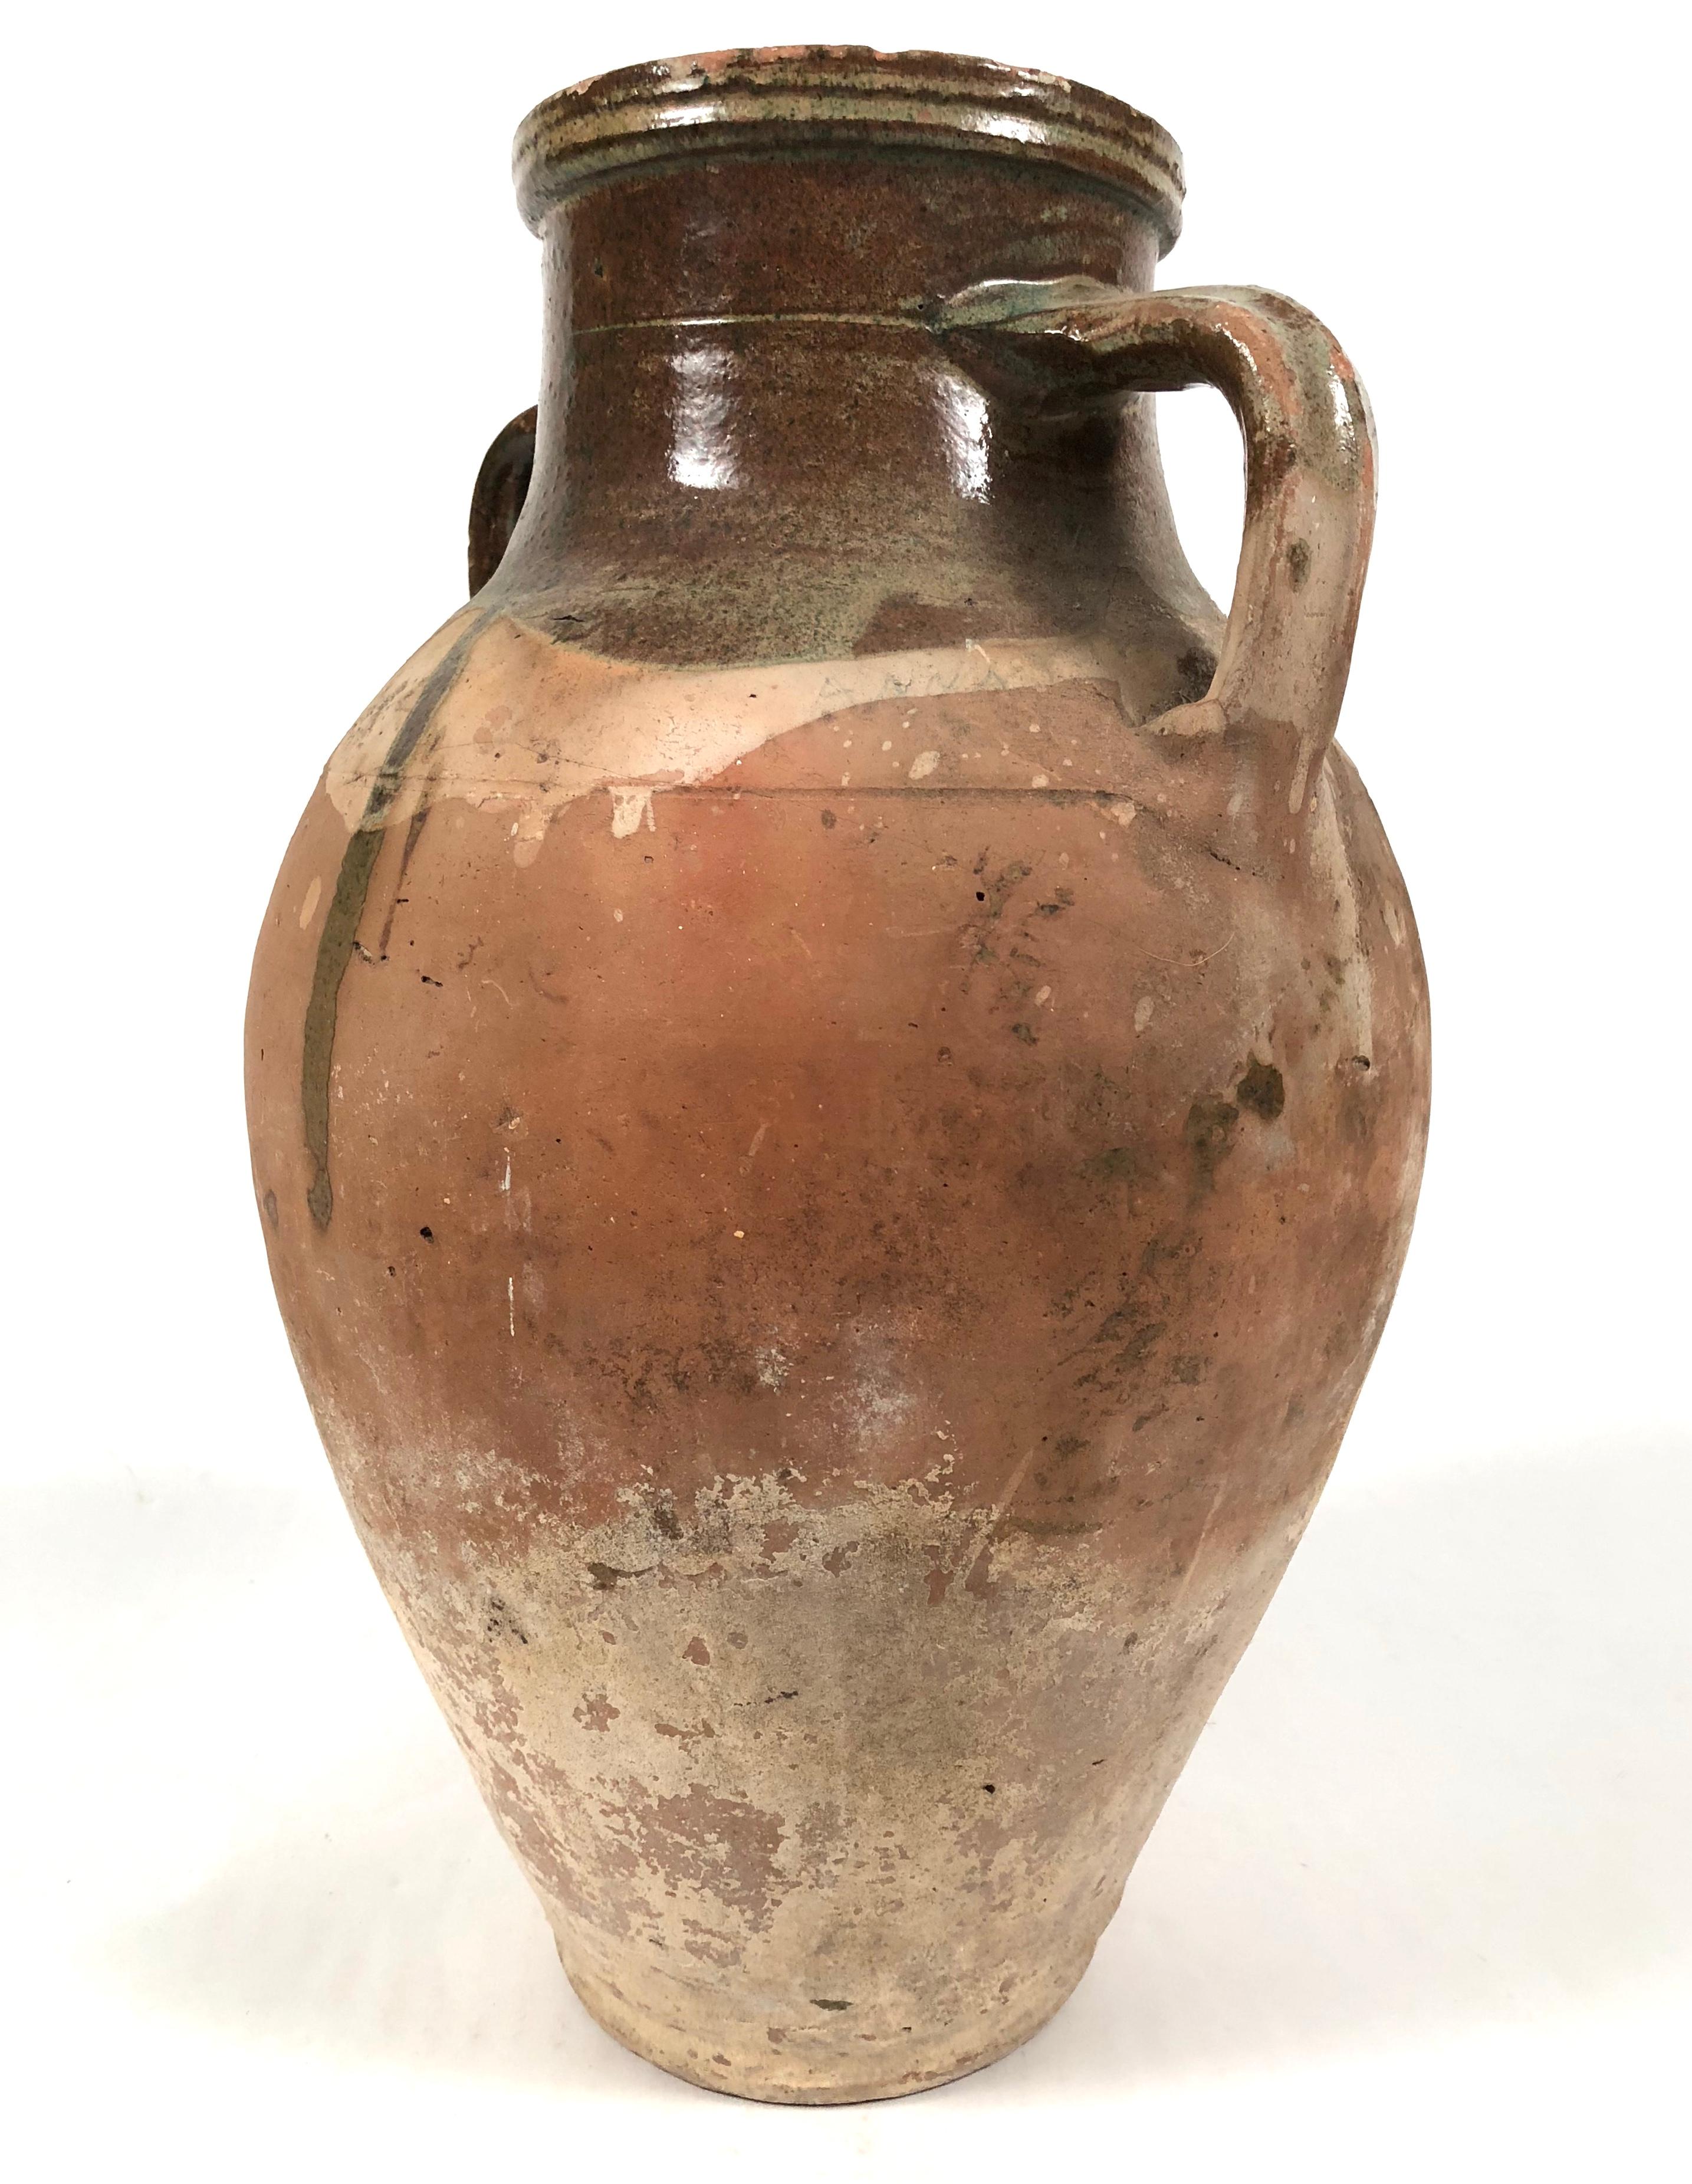 An antique French terra cotta confit pot, or Amphora, with sage green glazed drip decoration, of good size and with great character and patina.